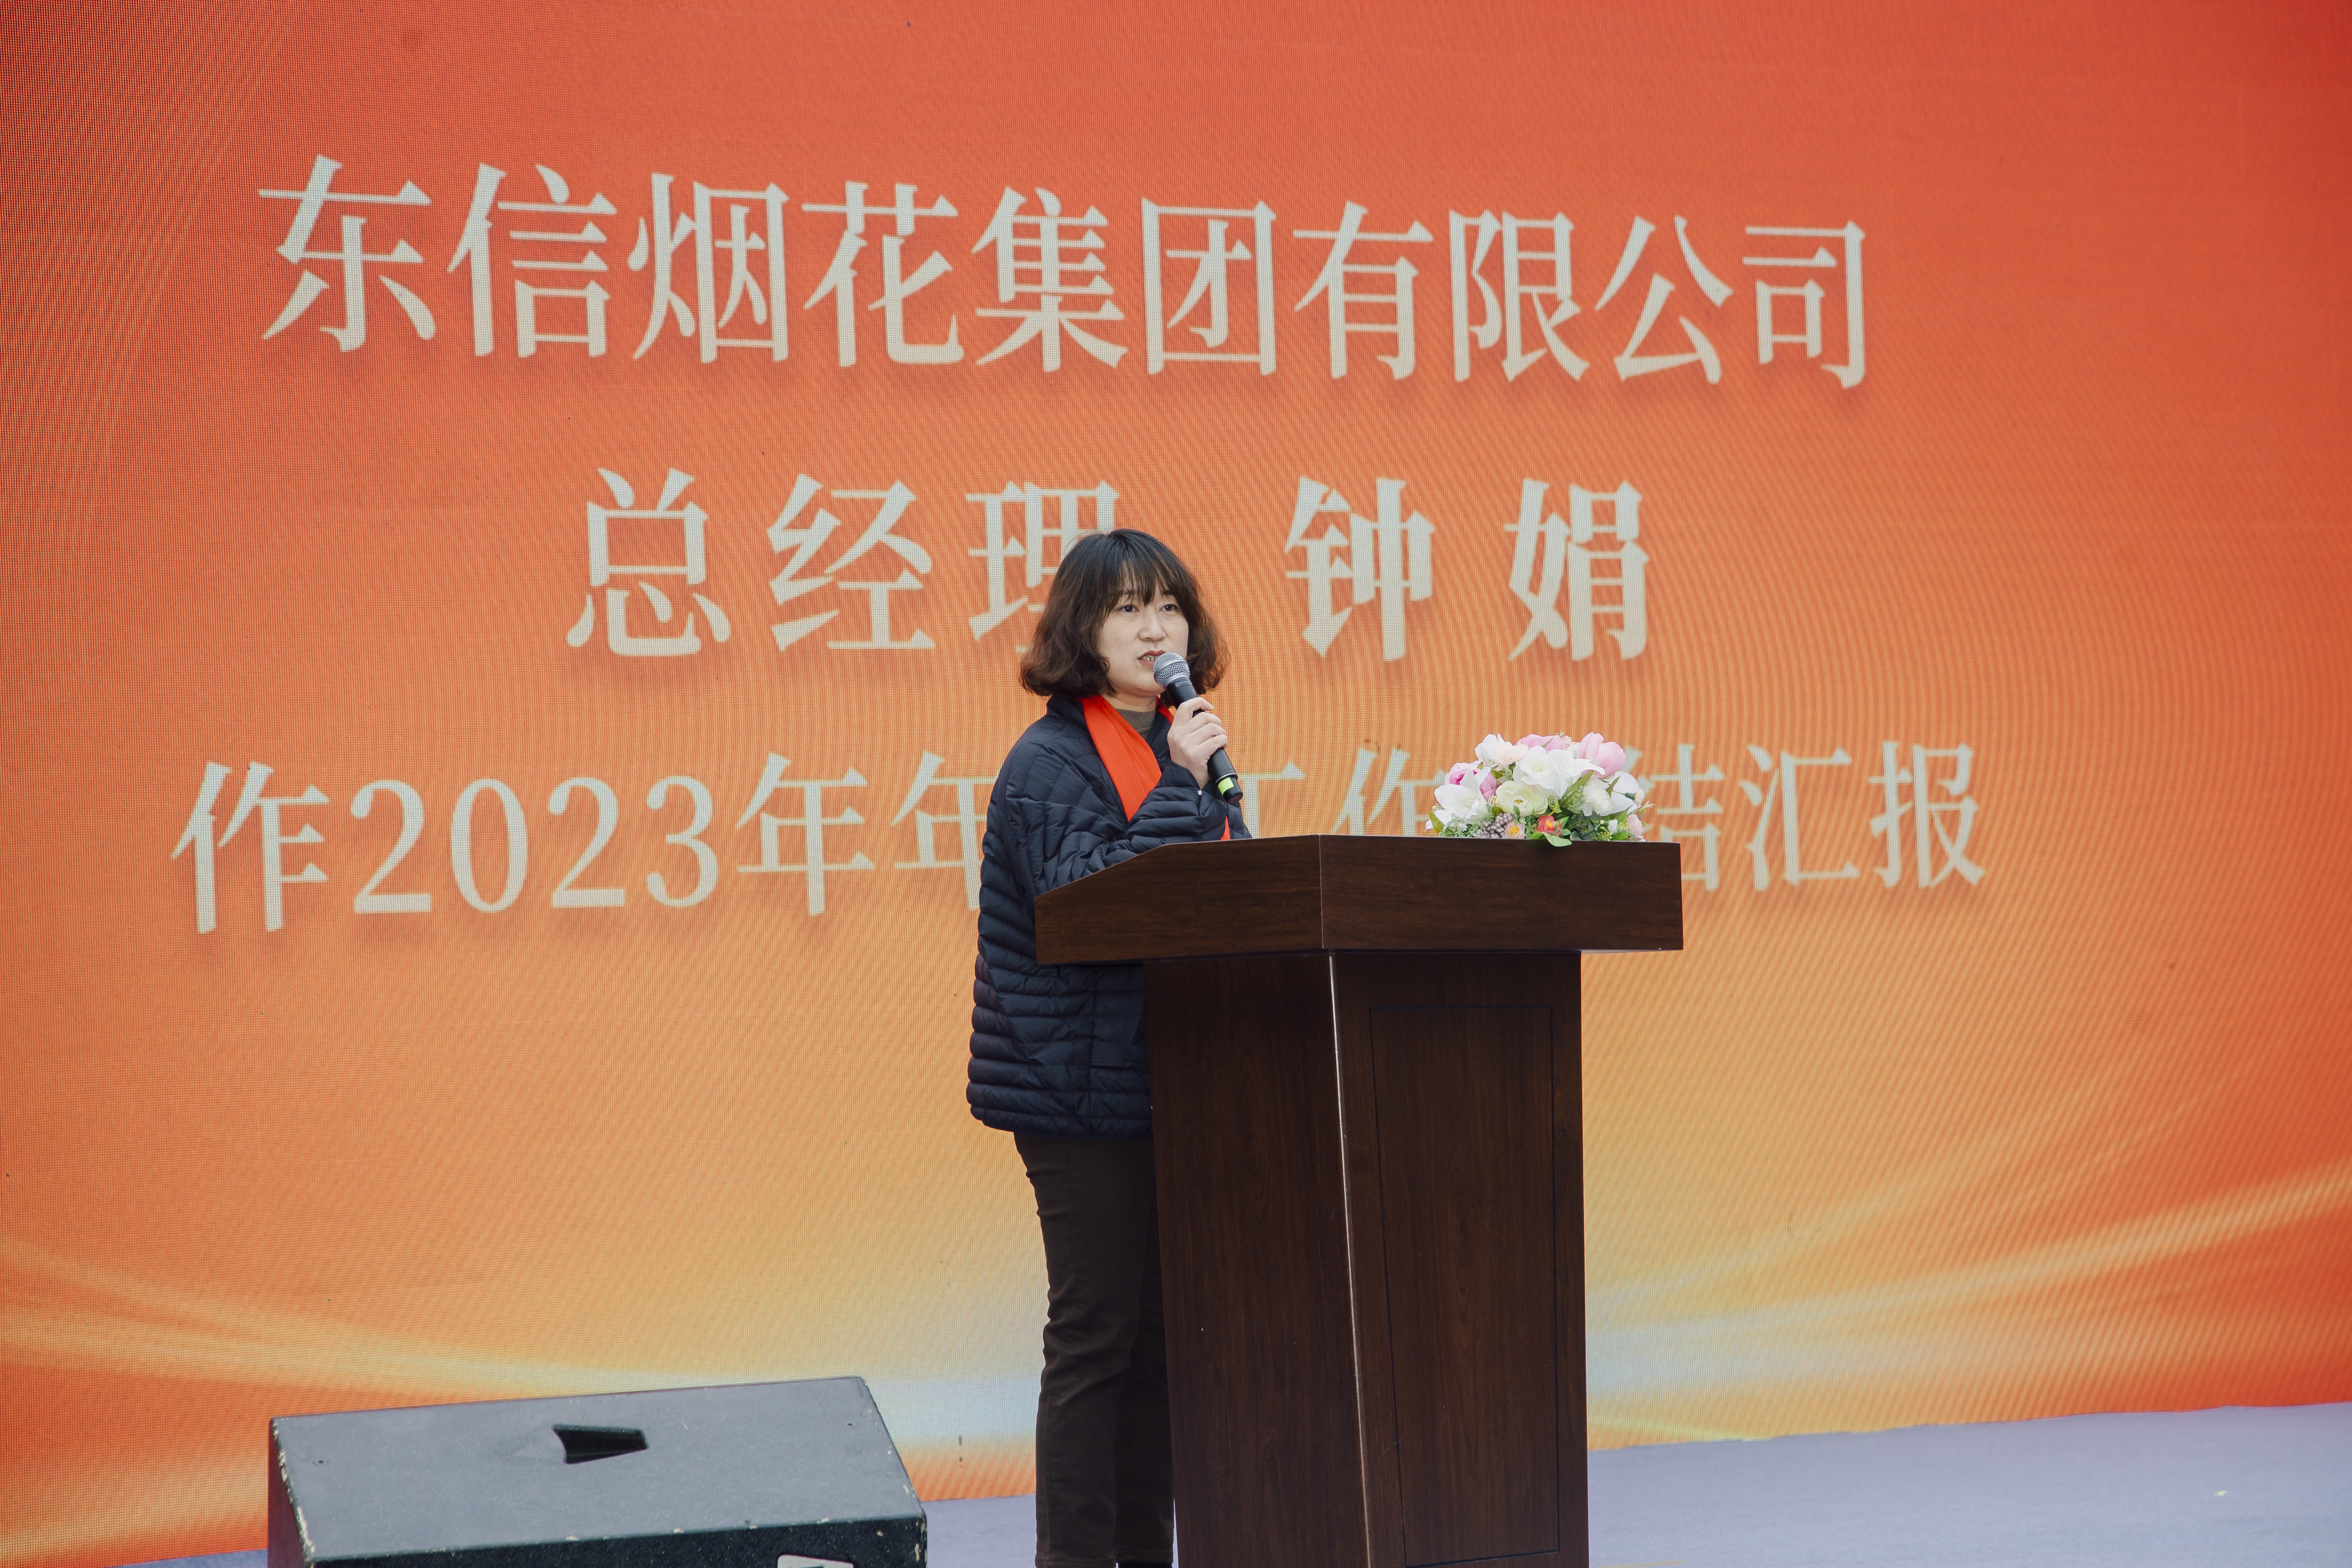 Dragons soar thousands of miles, riding the wind up | Dongxin Fireworks Group Holds the 2023 Annual Summary and Commendation Conference and Spring Festival Gala